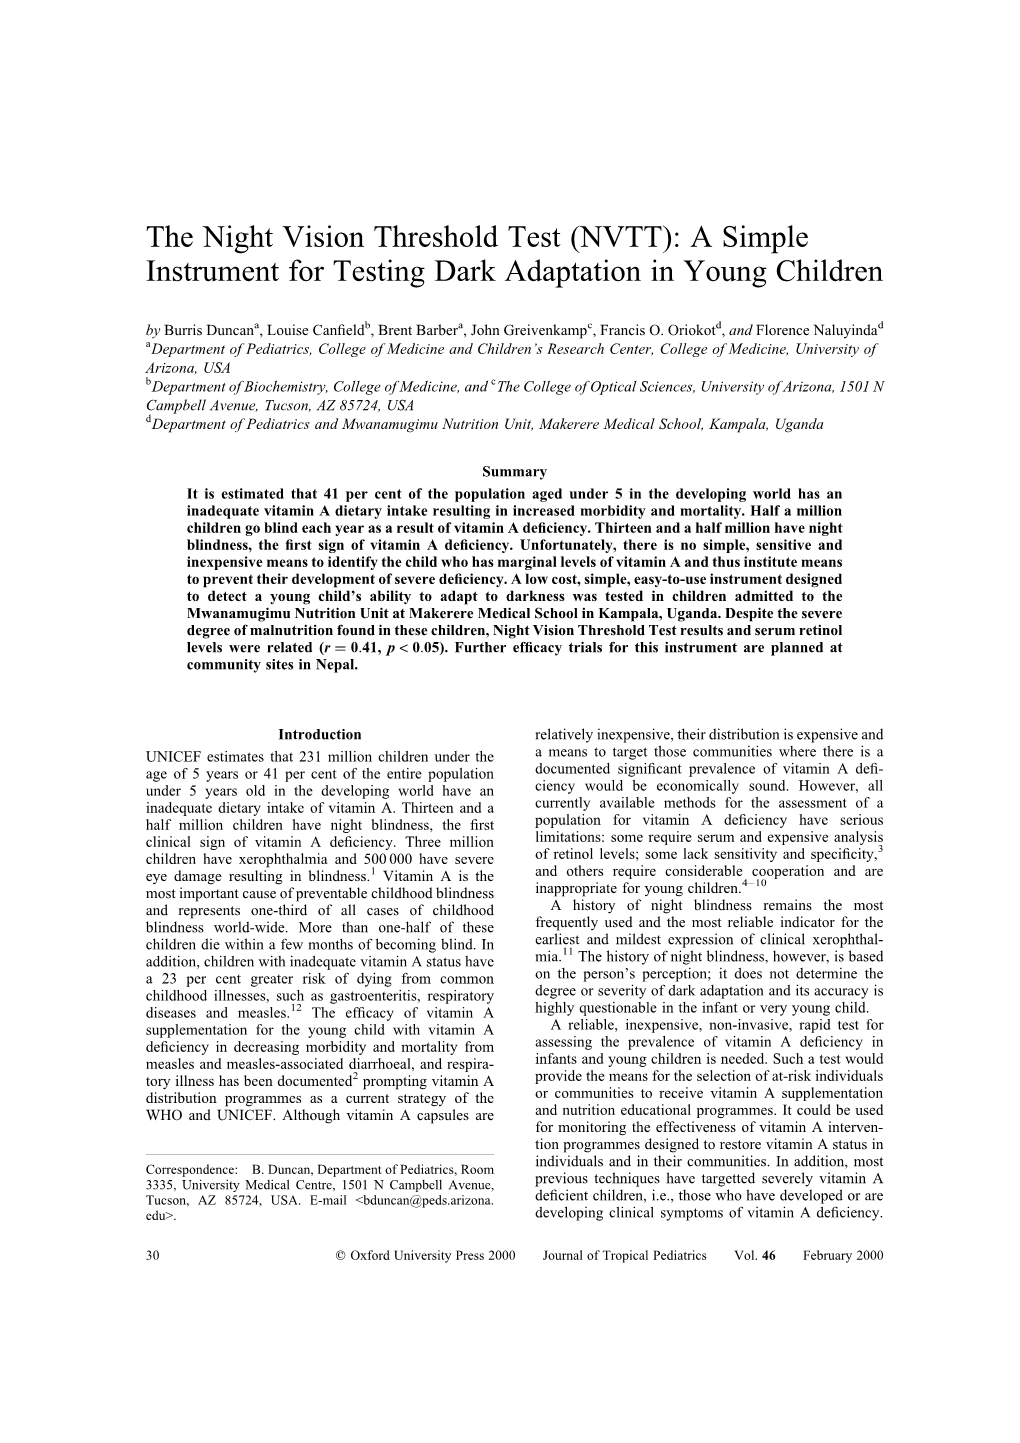 The Night Vision Threshold Test (NVTT): a Simple Instrument for Testing Dark Adaptation in Young Children